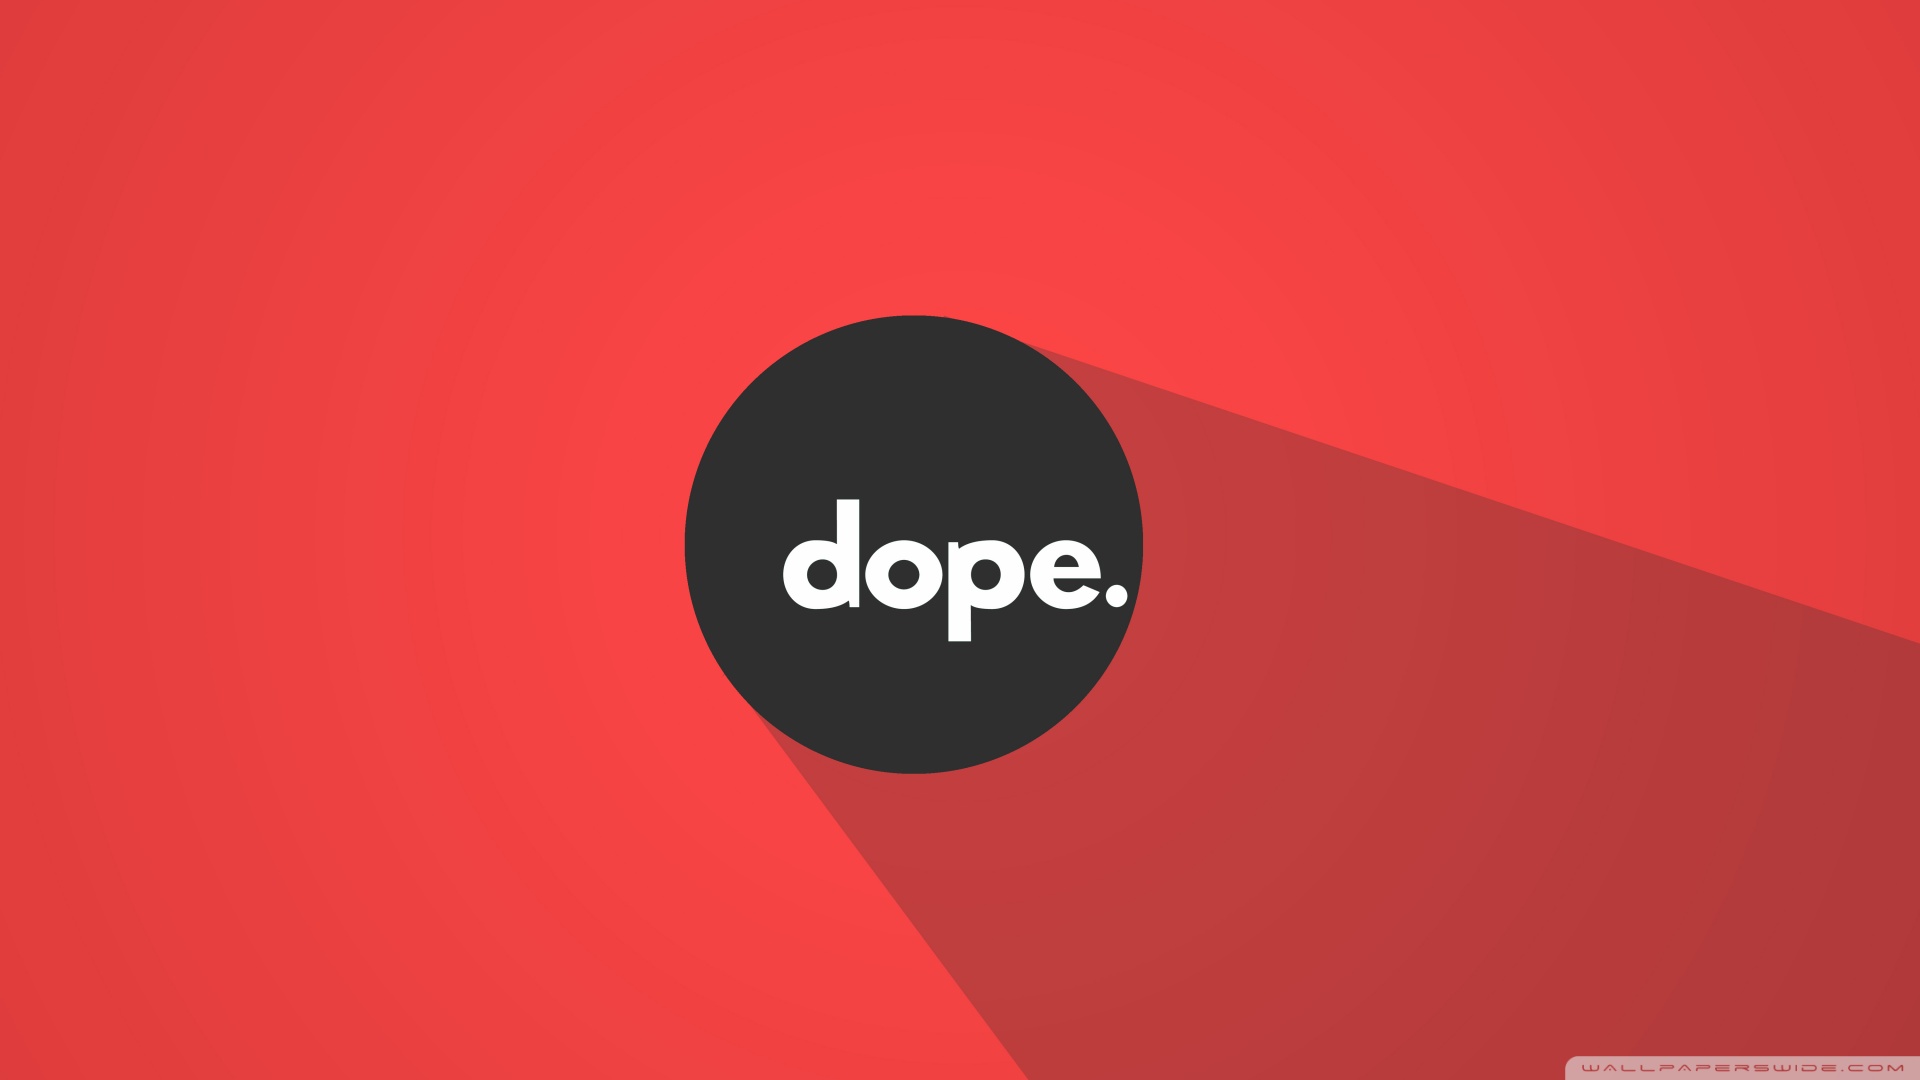 HD Dope Wallpapers on the App Store